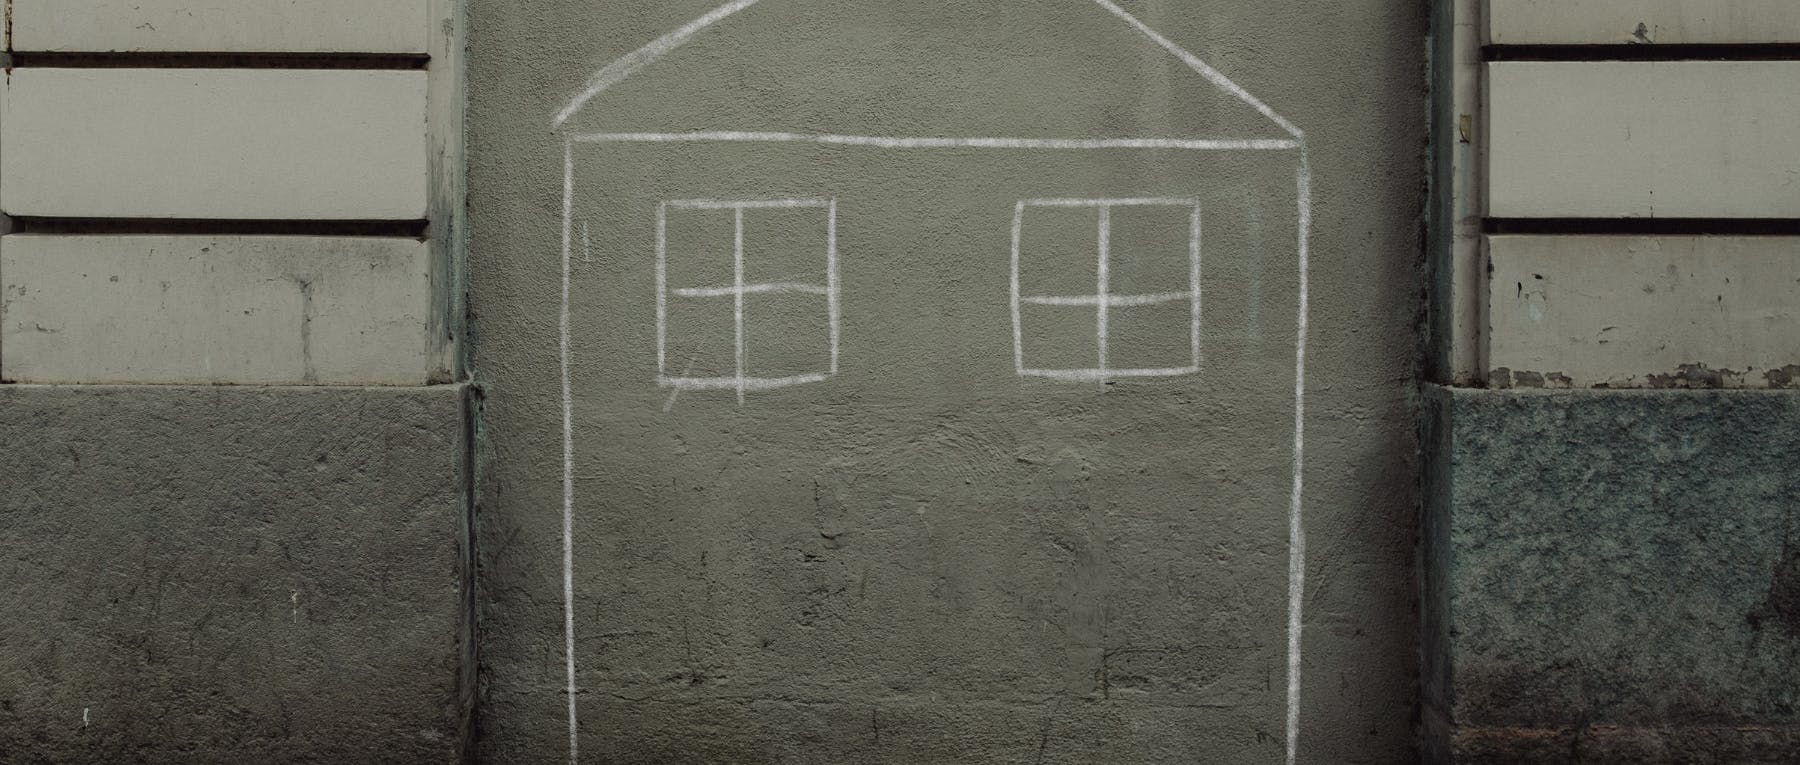 chalk outline drawing of a house on the side of a grey building